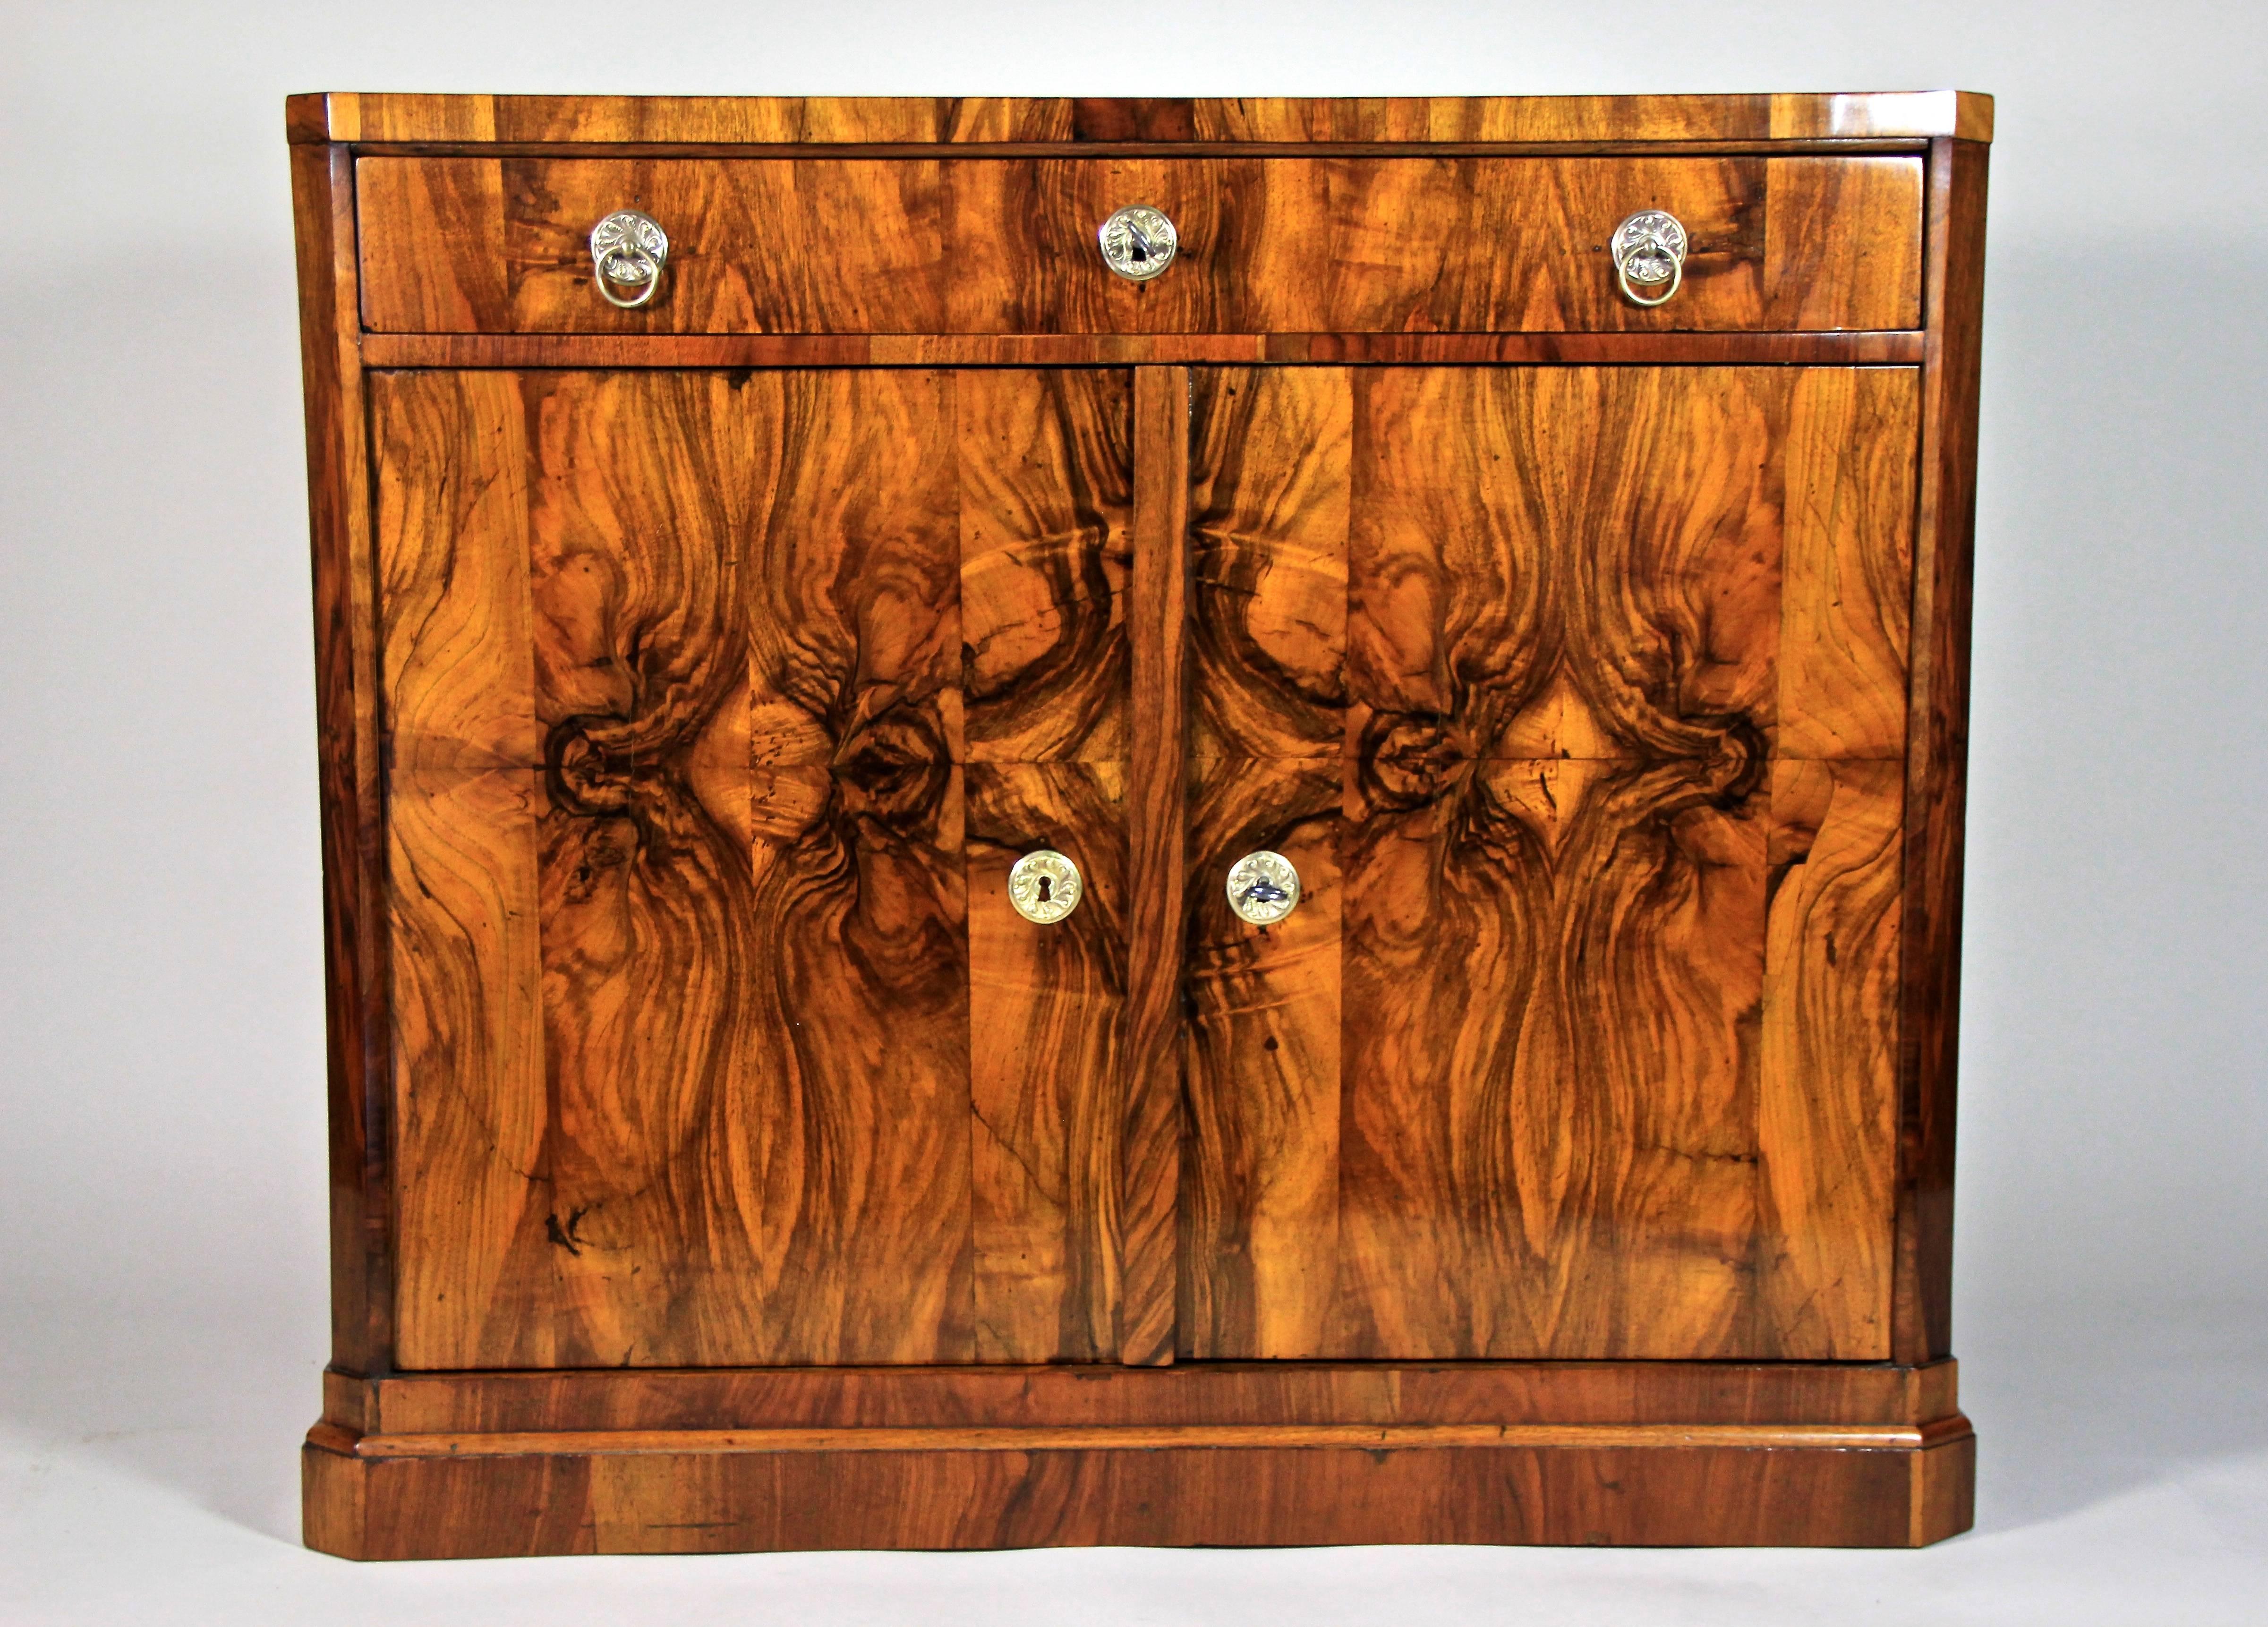 This absolute outstanding Biedermeier trumeau chest was made in South Germany, circa 1825. Reflecting the typical attributes of this period, a clear straight design combining a large drawer above two doors makes this one a real special. Noble brass